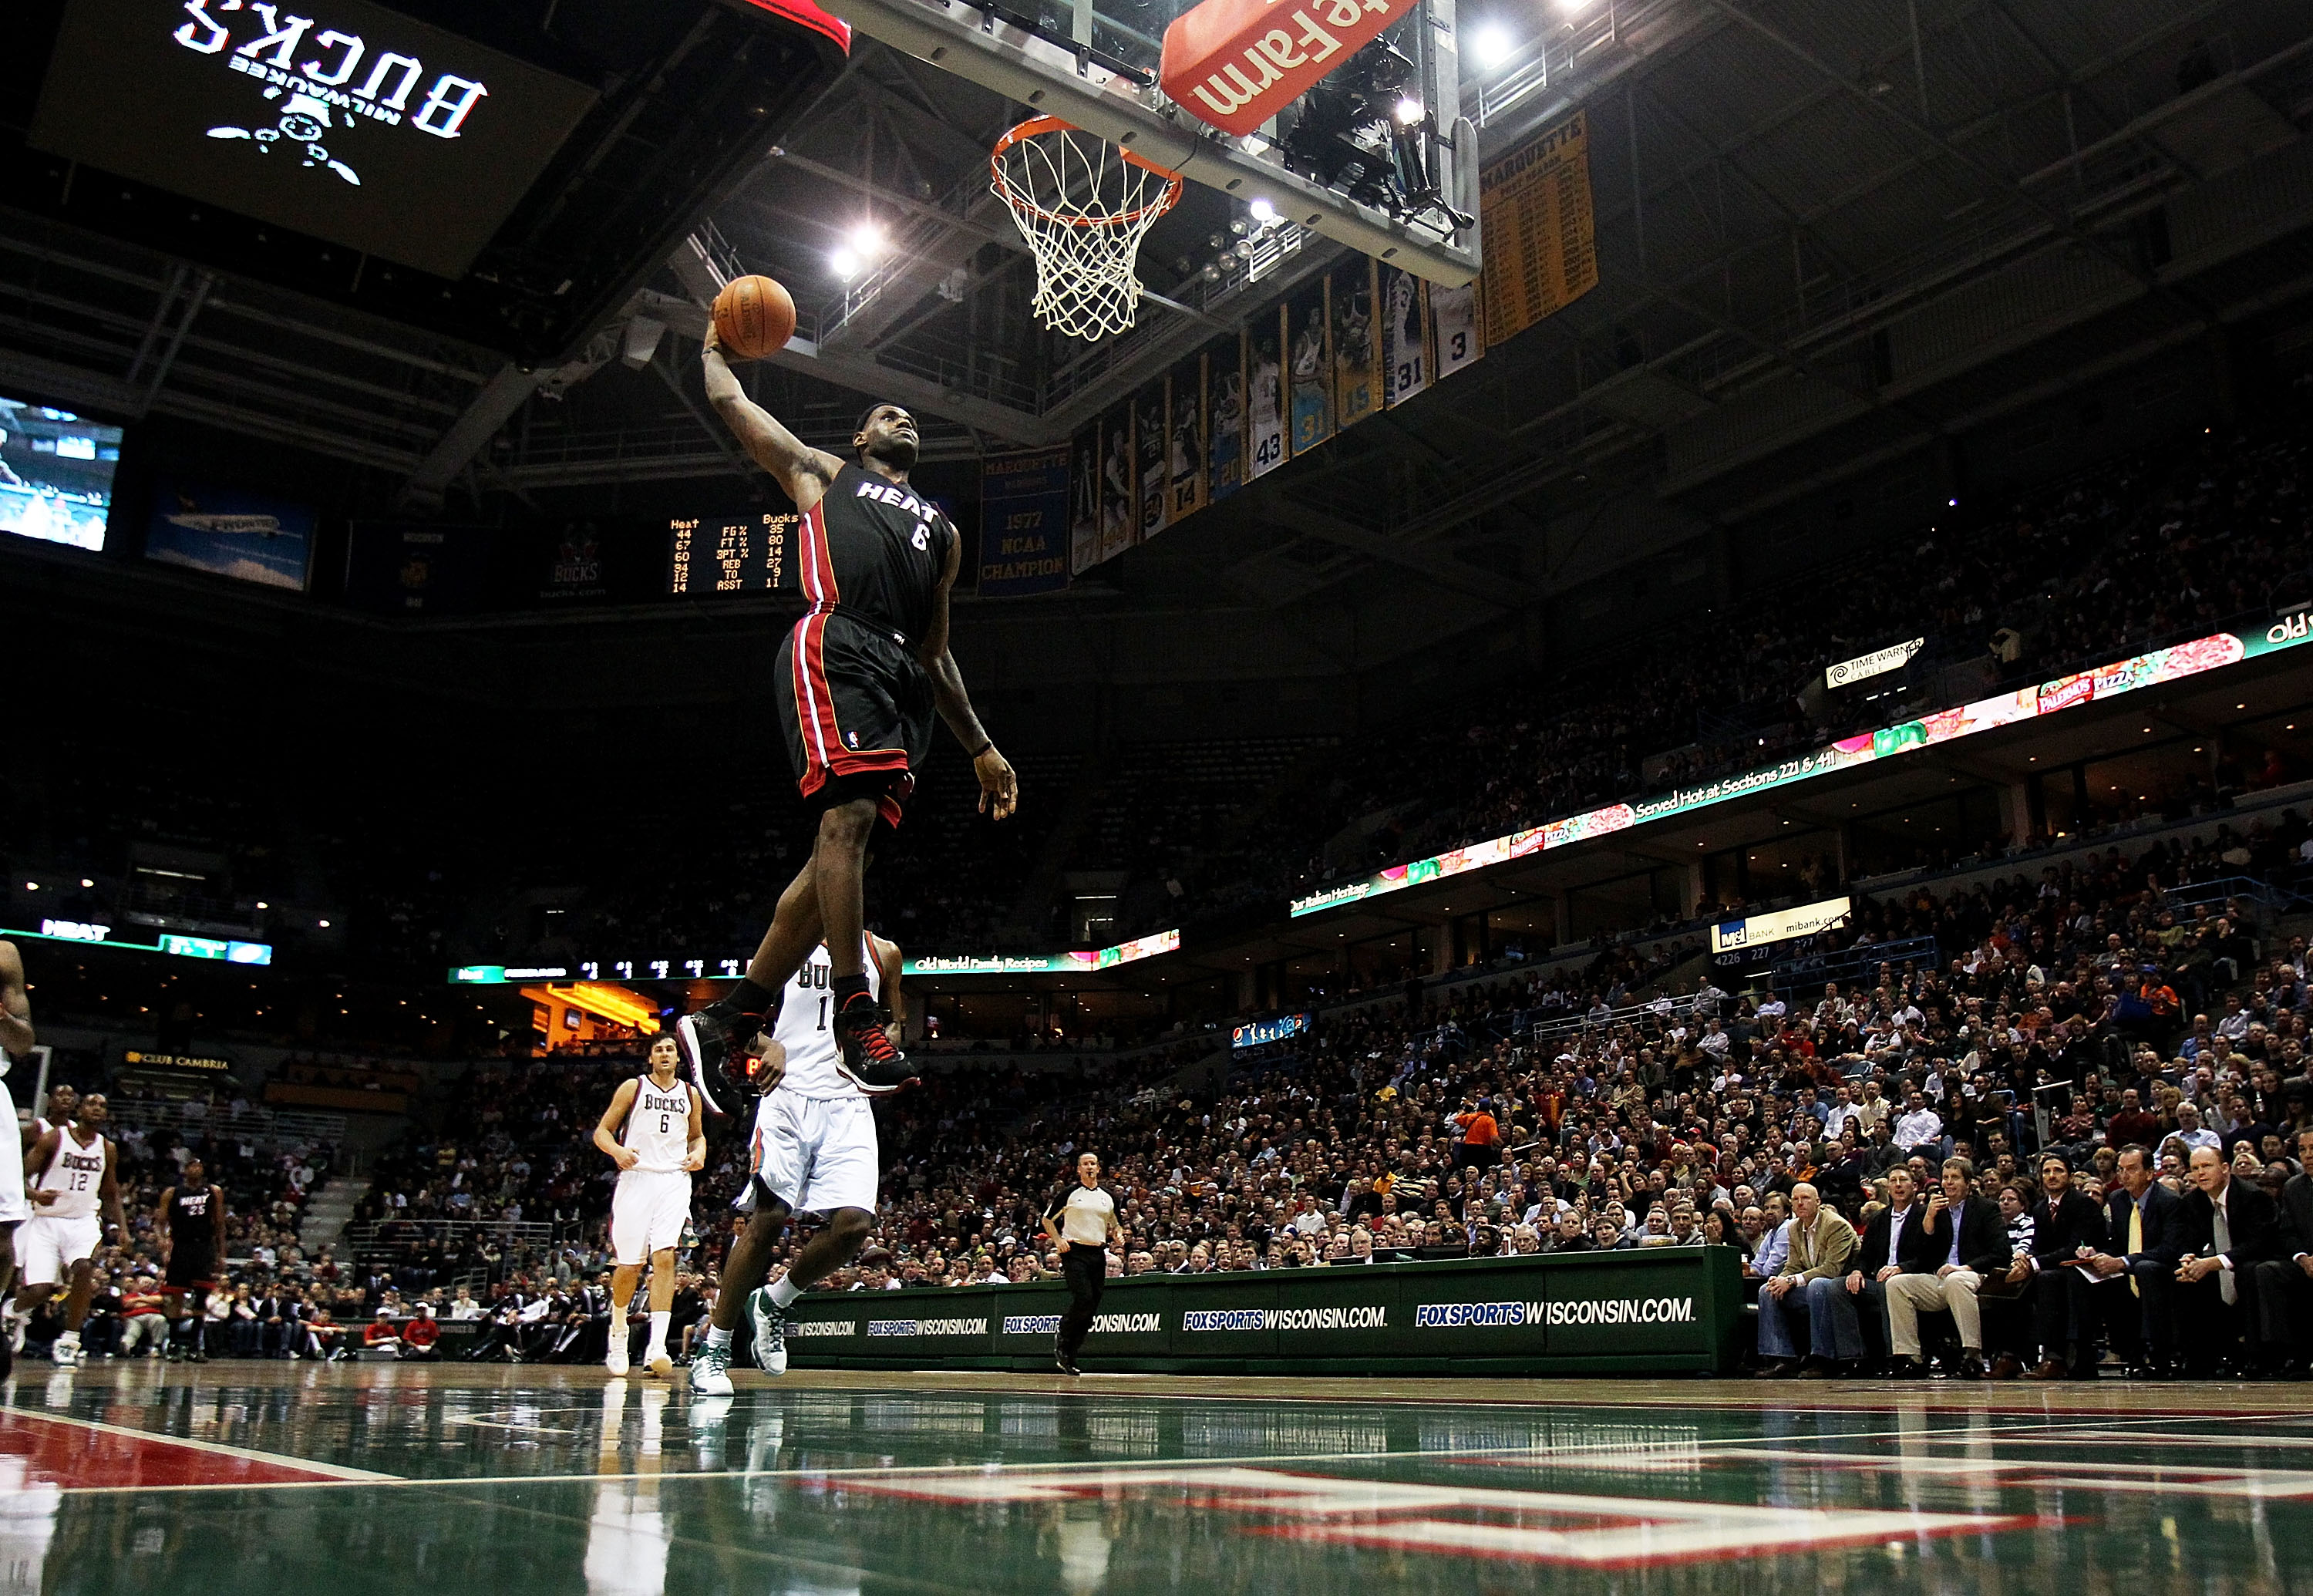 MILWAUKEE, WI - DECEMBER 06: LeBron James #6 of the Miami Heat goes up for a dunk against the Milwaukee Bucks at the Bradley Center on December 6, 2010 in Milwaukee, Wisconsin. The Heat defeated the Bucks 88-78. NOTE TO USER: User expressly acknowledges a